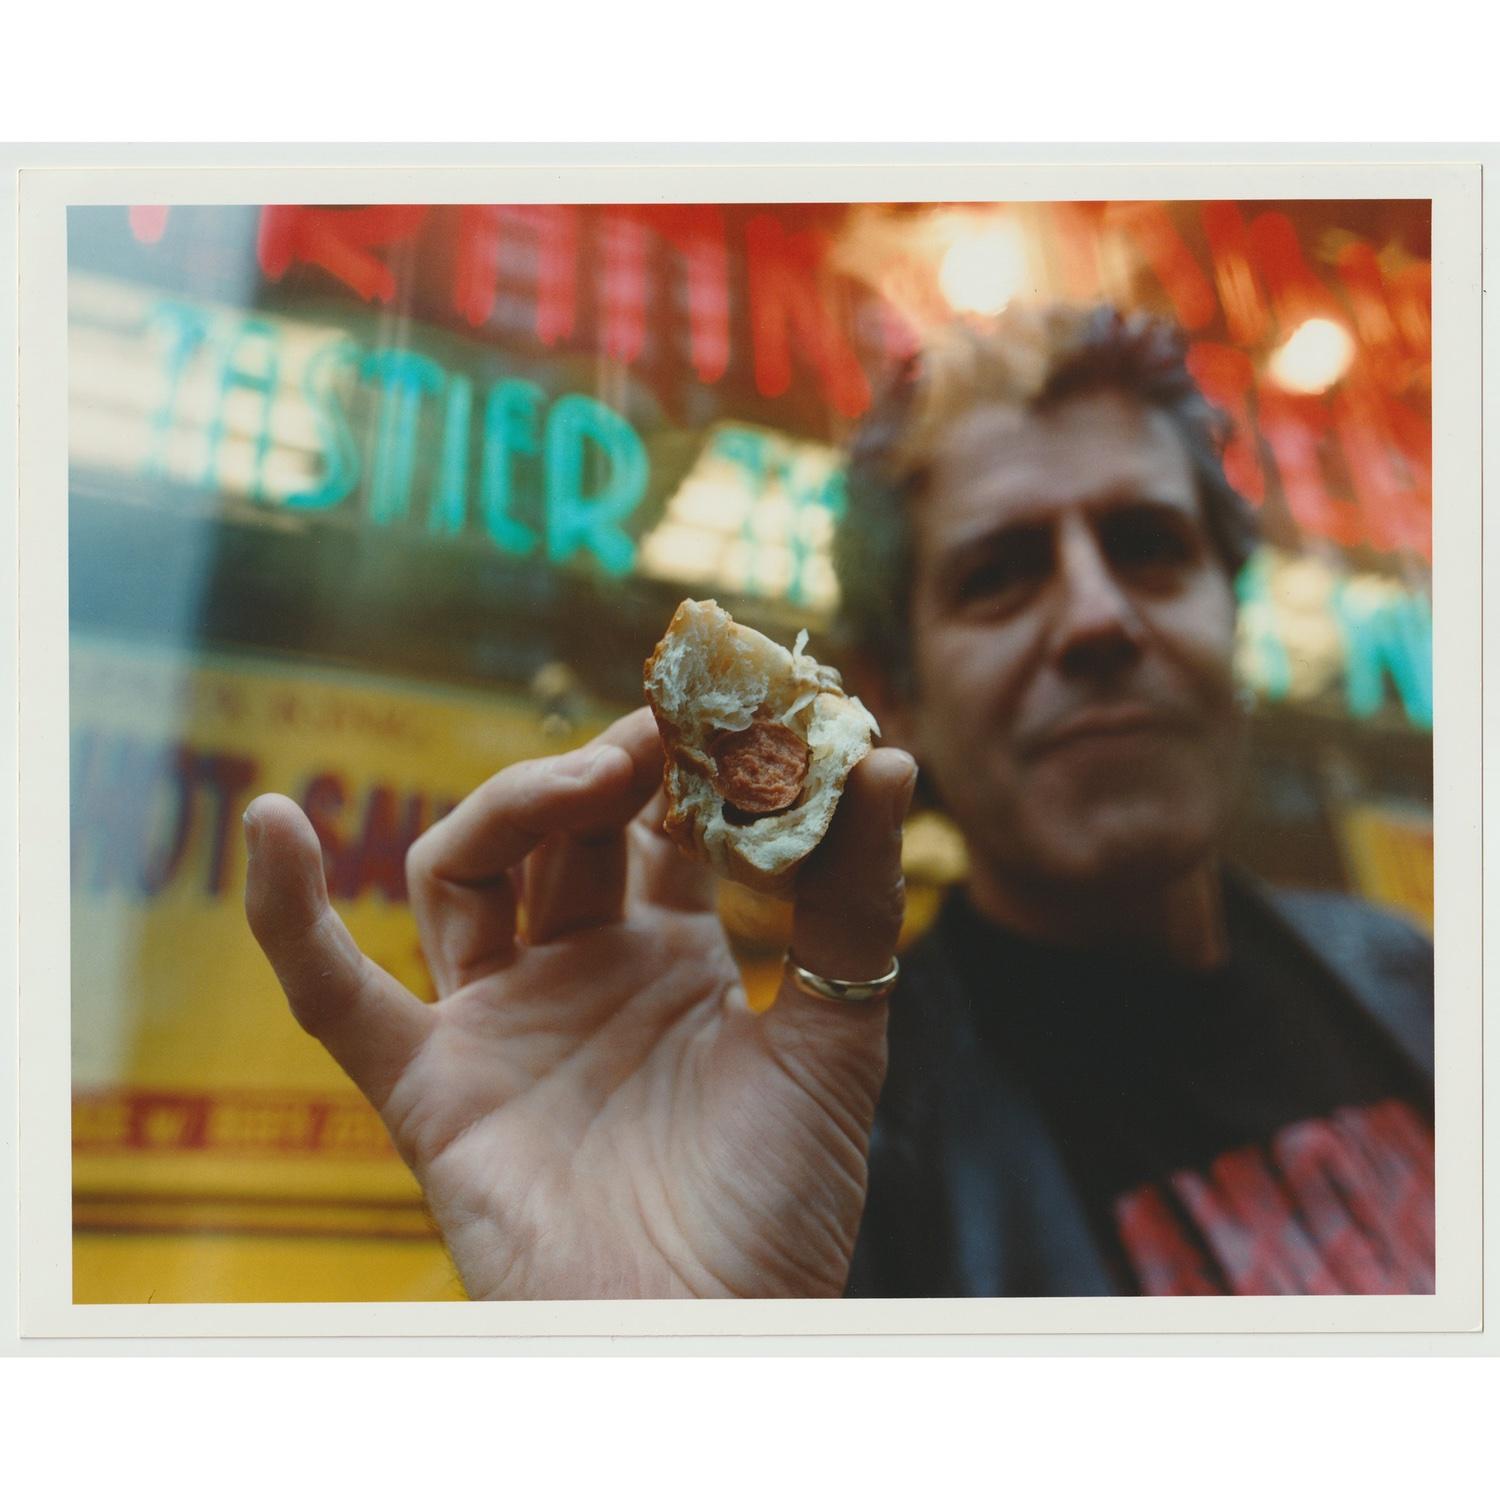 Original hand-printed 8x10” vintage color work print from photographer Jake Chessum of Anthony Bourdain taken in NYC outside Papaya King on 86th and Lexington

Printed by Jake at the time of the photoshoot and signed on the back by Jake Chessum.